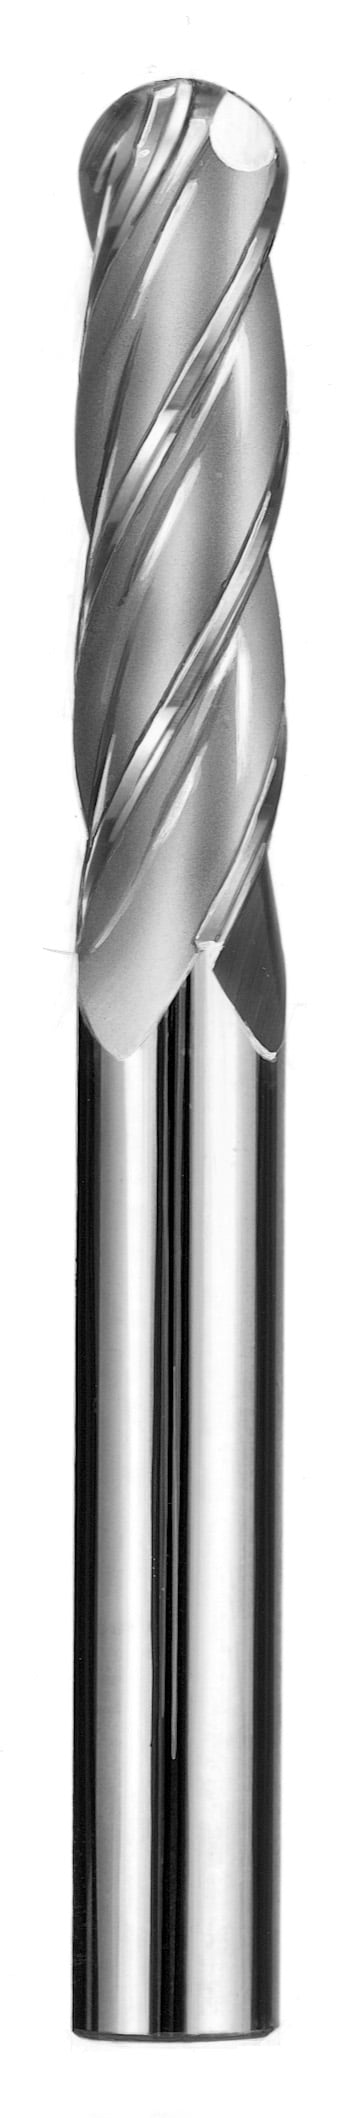 5/16" Dia, 4 Flute, Ball Nose End Mill - 33106